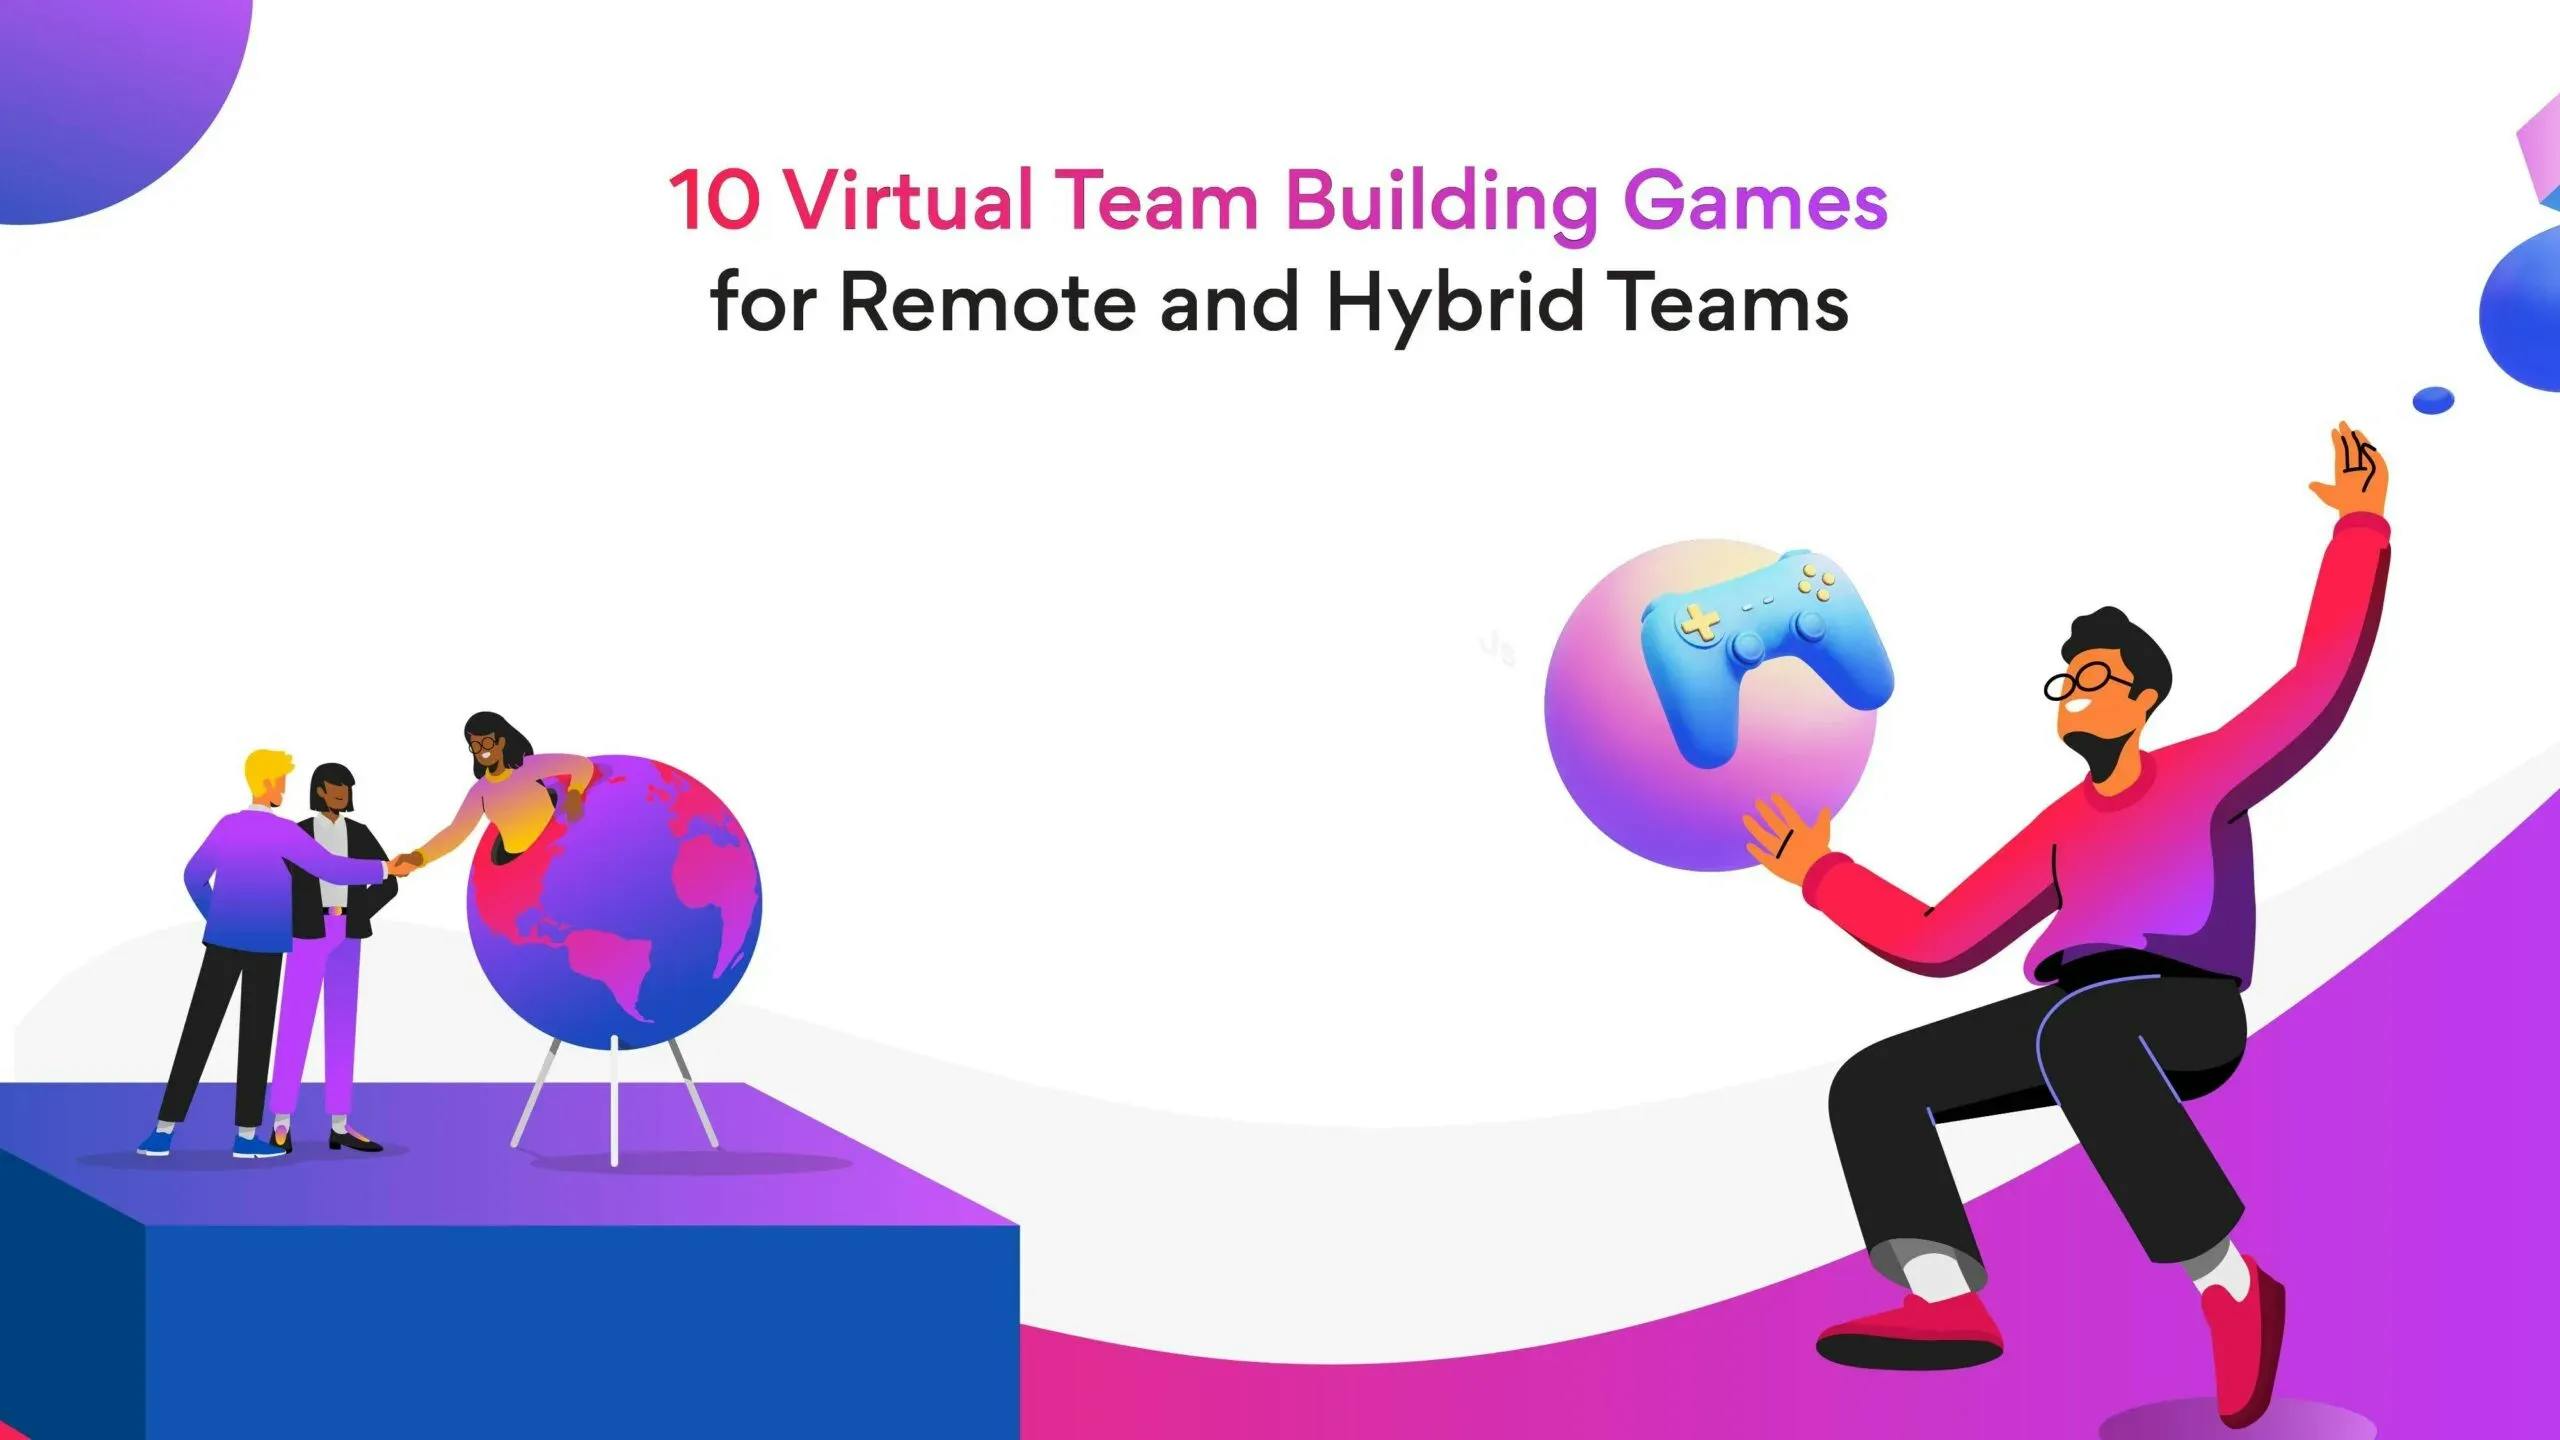 10 Amazing Virtual Team Building Games for Remote and Hybrid Teams